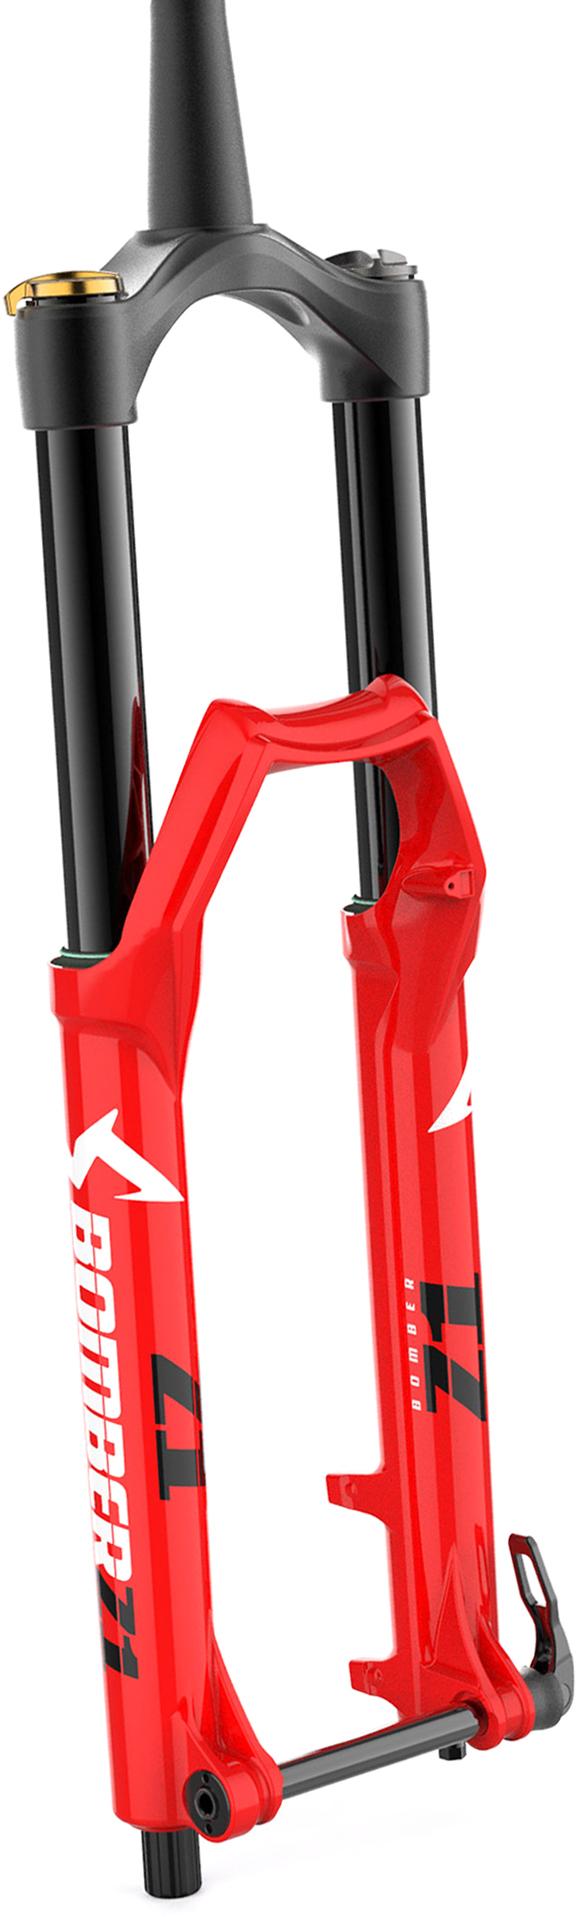 Marzocchi Bomber Z1 Boost Mountain Bike Forks  Red